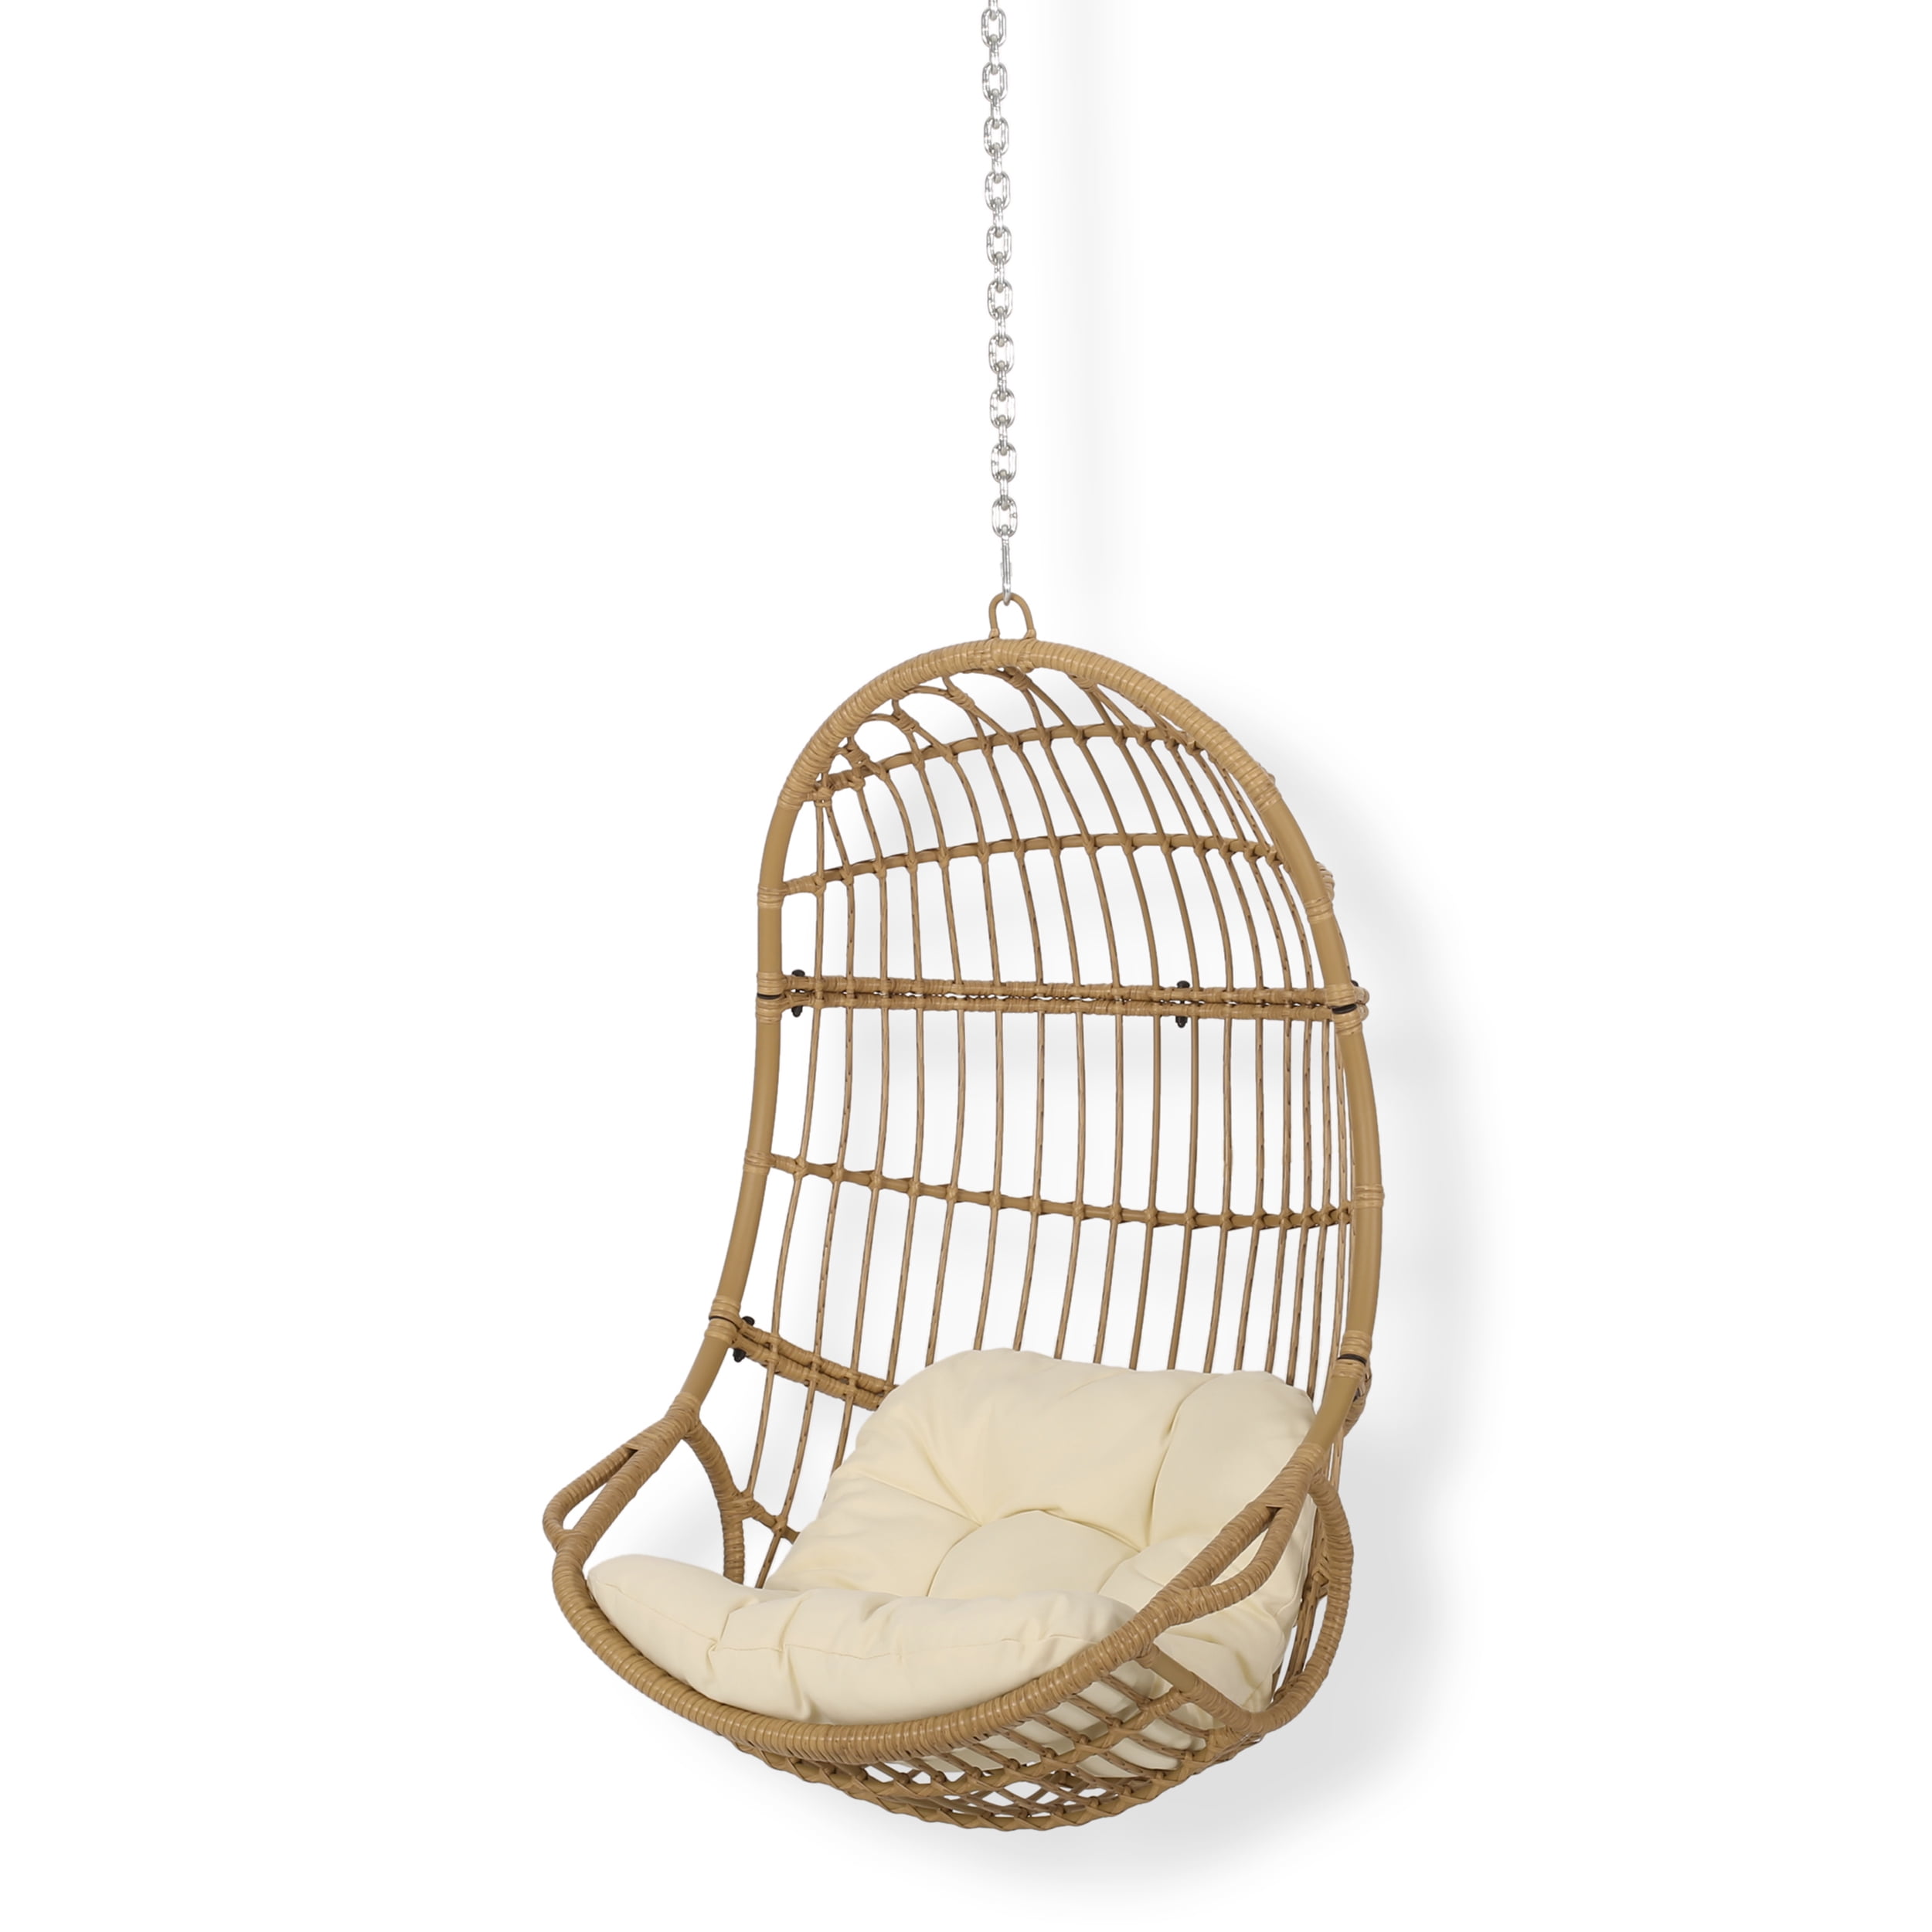 Noble House Meridan Wicker Rattan Hanging Chair with Cushion - Beige